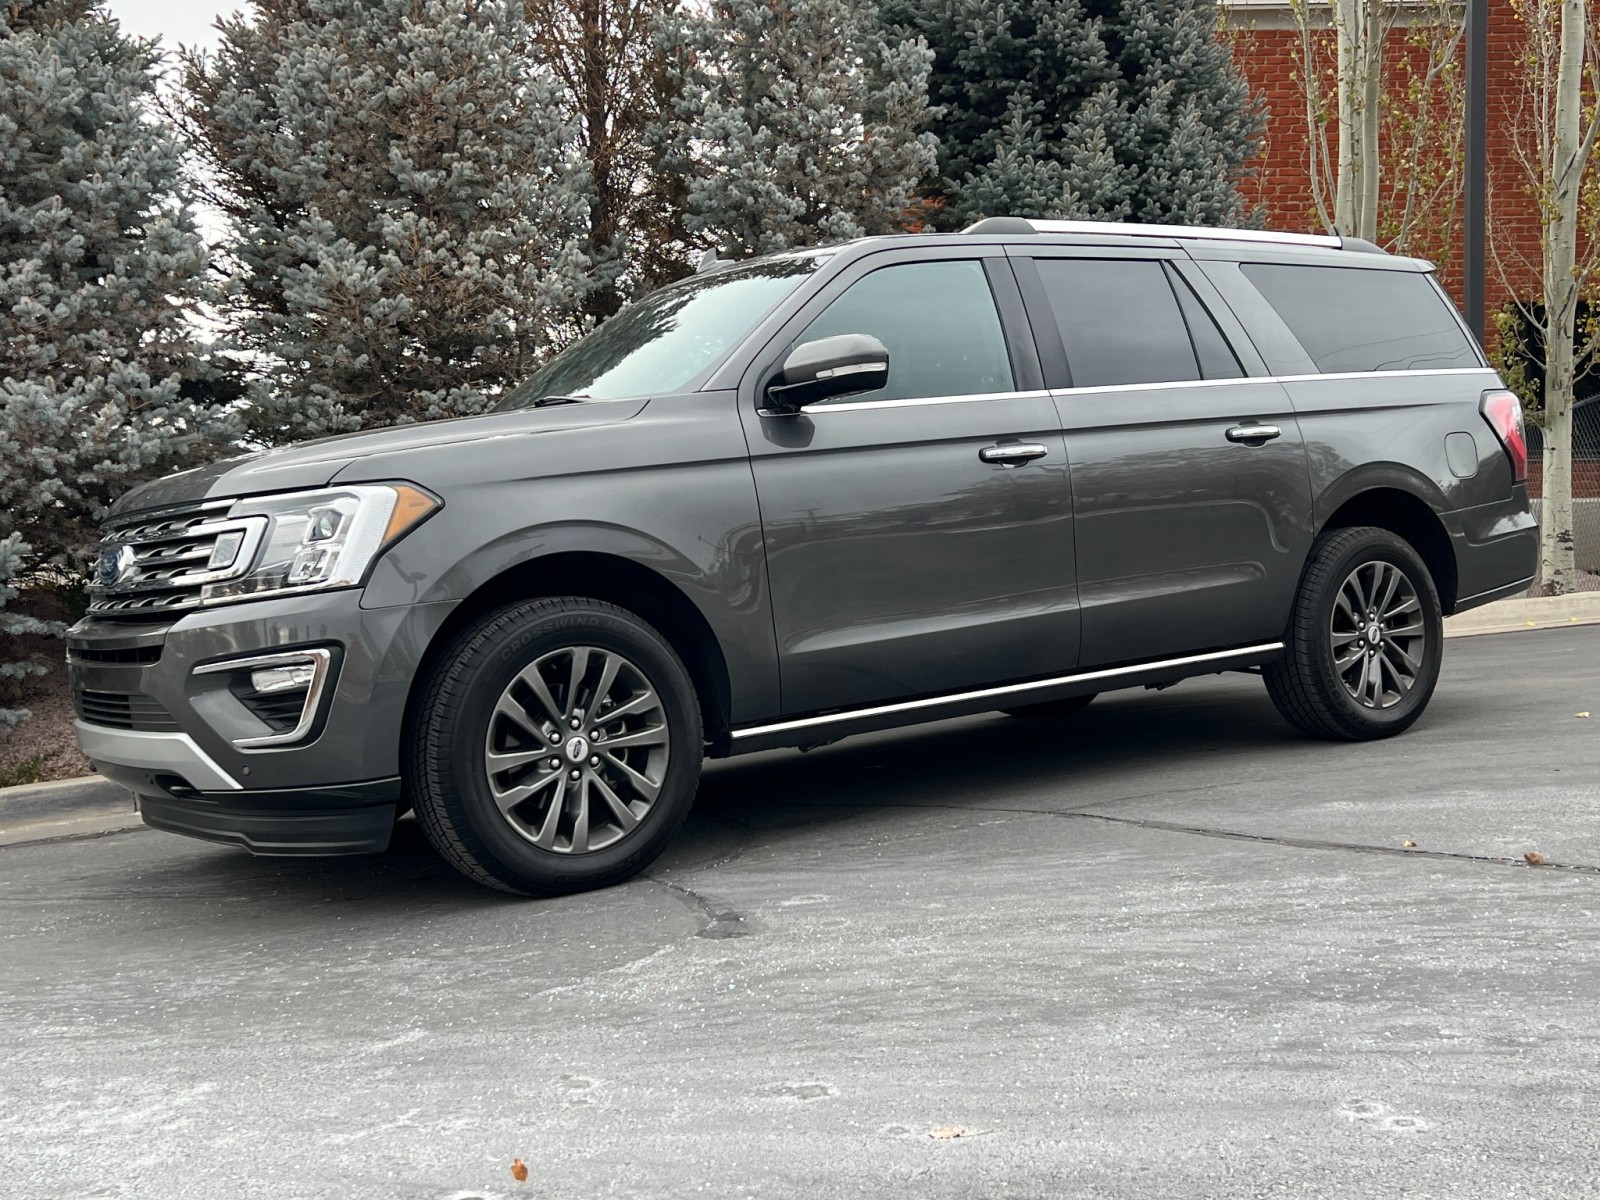 Pre-Owned 2021 Ford Expedition Max Limited SUV in Bountiful #A09046 |  Kentson Car Company